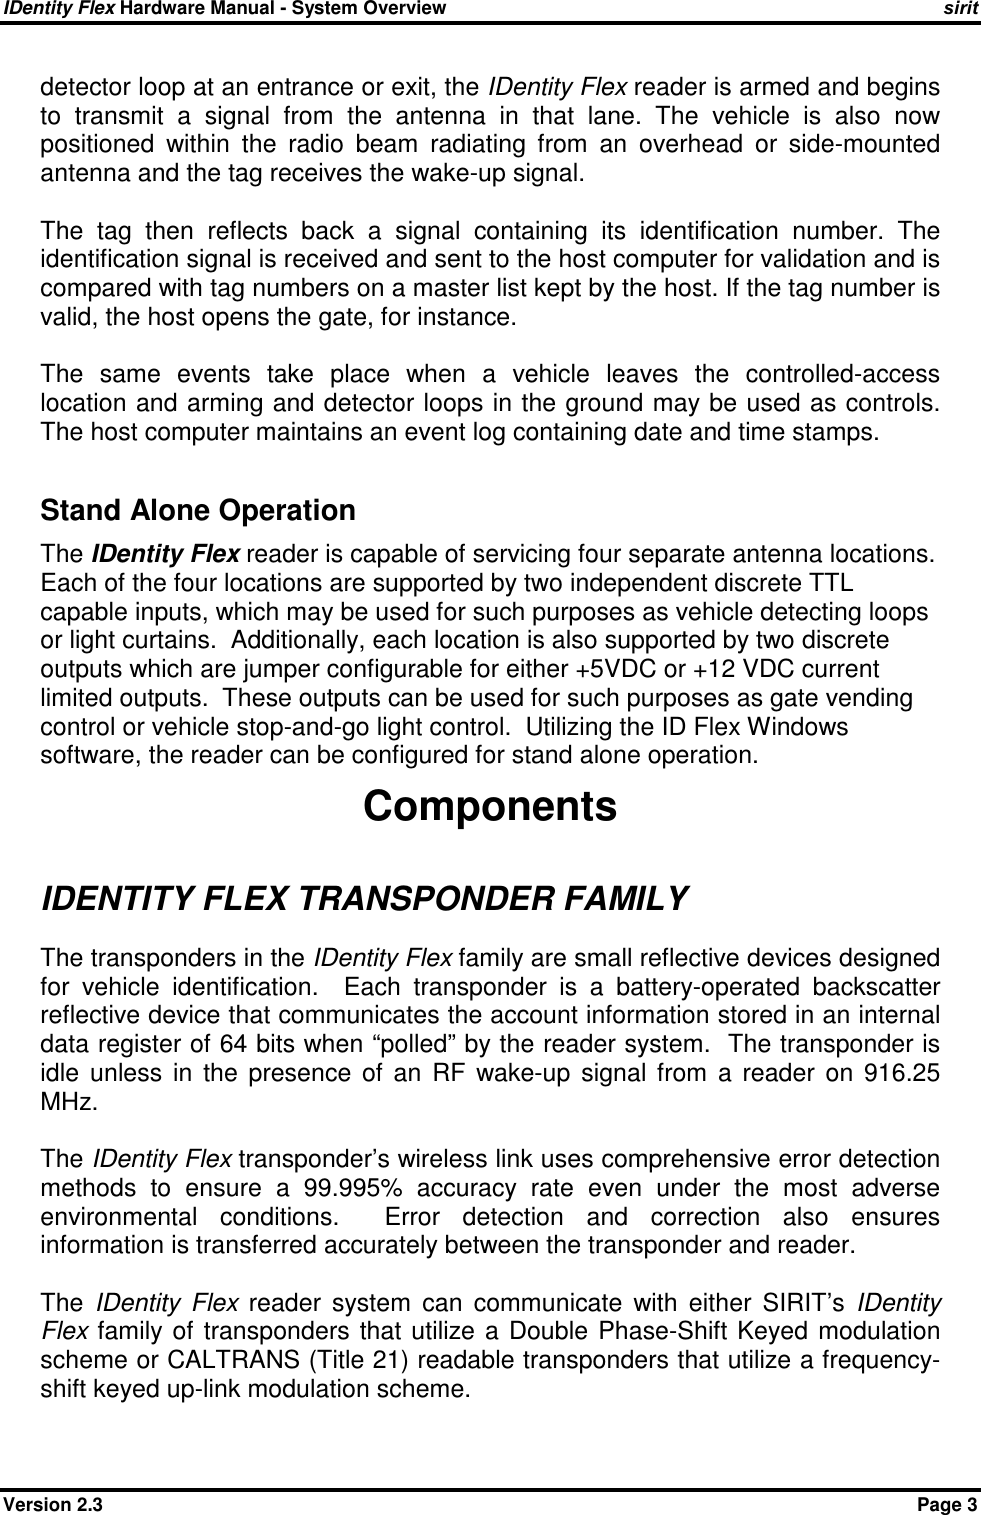 IDentity Flex Hardware Manual - System Overview    sirit Version 2.3    Page 3 detector loop at an entrance or exit, the IDentity Flex reader is armed and begins to  transmit  a  signal  from  the  antenna  in  that  lane.  The  vehicle  is  also  now positioned  within  the  radio  beam  radiating  from  an  overhead  or  side-mounted antenna and the tag receives the wake-up signal.  The  tag  then  reflects  back  a  signal  containing  its  identification  number.  The identification signal is received and sent to the host computer for validation and is compared with tag numbers on a master list kept by the host. If the tag number is valid, the host opens the gate, for instance.  The  same  events  take  place  when  a  vehicle  leaves  the  controlled-access location and arming and detector loops in the ground may be used as controls. The host computer maintains an event log containing date and time stamps.  Stand Alone Operation The IDentity Flex reader is capable of servicing four separate antenna locations.  Each of the four locations are supported by two independent discrete TTL capable inputs, which may be used for such purposes as vehicle detecting loops or light curtains.  Additionally, each location is also supported by two discrete outputs which are jumper configurable for either +5VDC or +12 VDC current limited outputs.  These outputs can be used for such purposes as gate vending control or vehicle stop-and-go light control.  Utilizing the ID Flex Windows software, the reader can be configured for stand alone operation. Components IDENTITY FLEX TRANSPONDER FAMILY The transponders in the IDentity Flex family are small reflective devices designed for  vehicle  identification.    Each  transponder  is  a  battery-operated  backscatter reflective device that communicates the account information stored in an internal data register of 64 bits when “polled” by the reader system.  The transponder is idle  unless  in  the  presence  of  an  RF  wake-up  signal  from  a  reader  on  916.25 MHz.  The IDentity Flex transponder’s wireless link uses comprehensive error detection methods  to  ensure  a  99.995%  accuracy  rate  even  under  the  most  adverse environmental  conditions.    Error  detection  and  correction  also  ensures information is transferred accurately between the transponder and reader.  The  IDentity  Flex  reader  system  can  communicate  with  either  SIRIT’s  IDentity Flex  family of  transponders  that utilize a  Double  Phase-Shift  Keyed  modulation scheme or CALTRANS (Title 21) readable transponders that utilize a frequency-shift keyed up-link modulation scheme.  